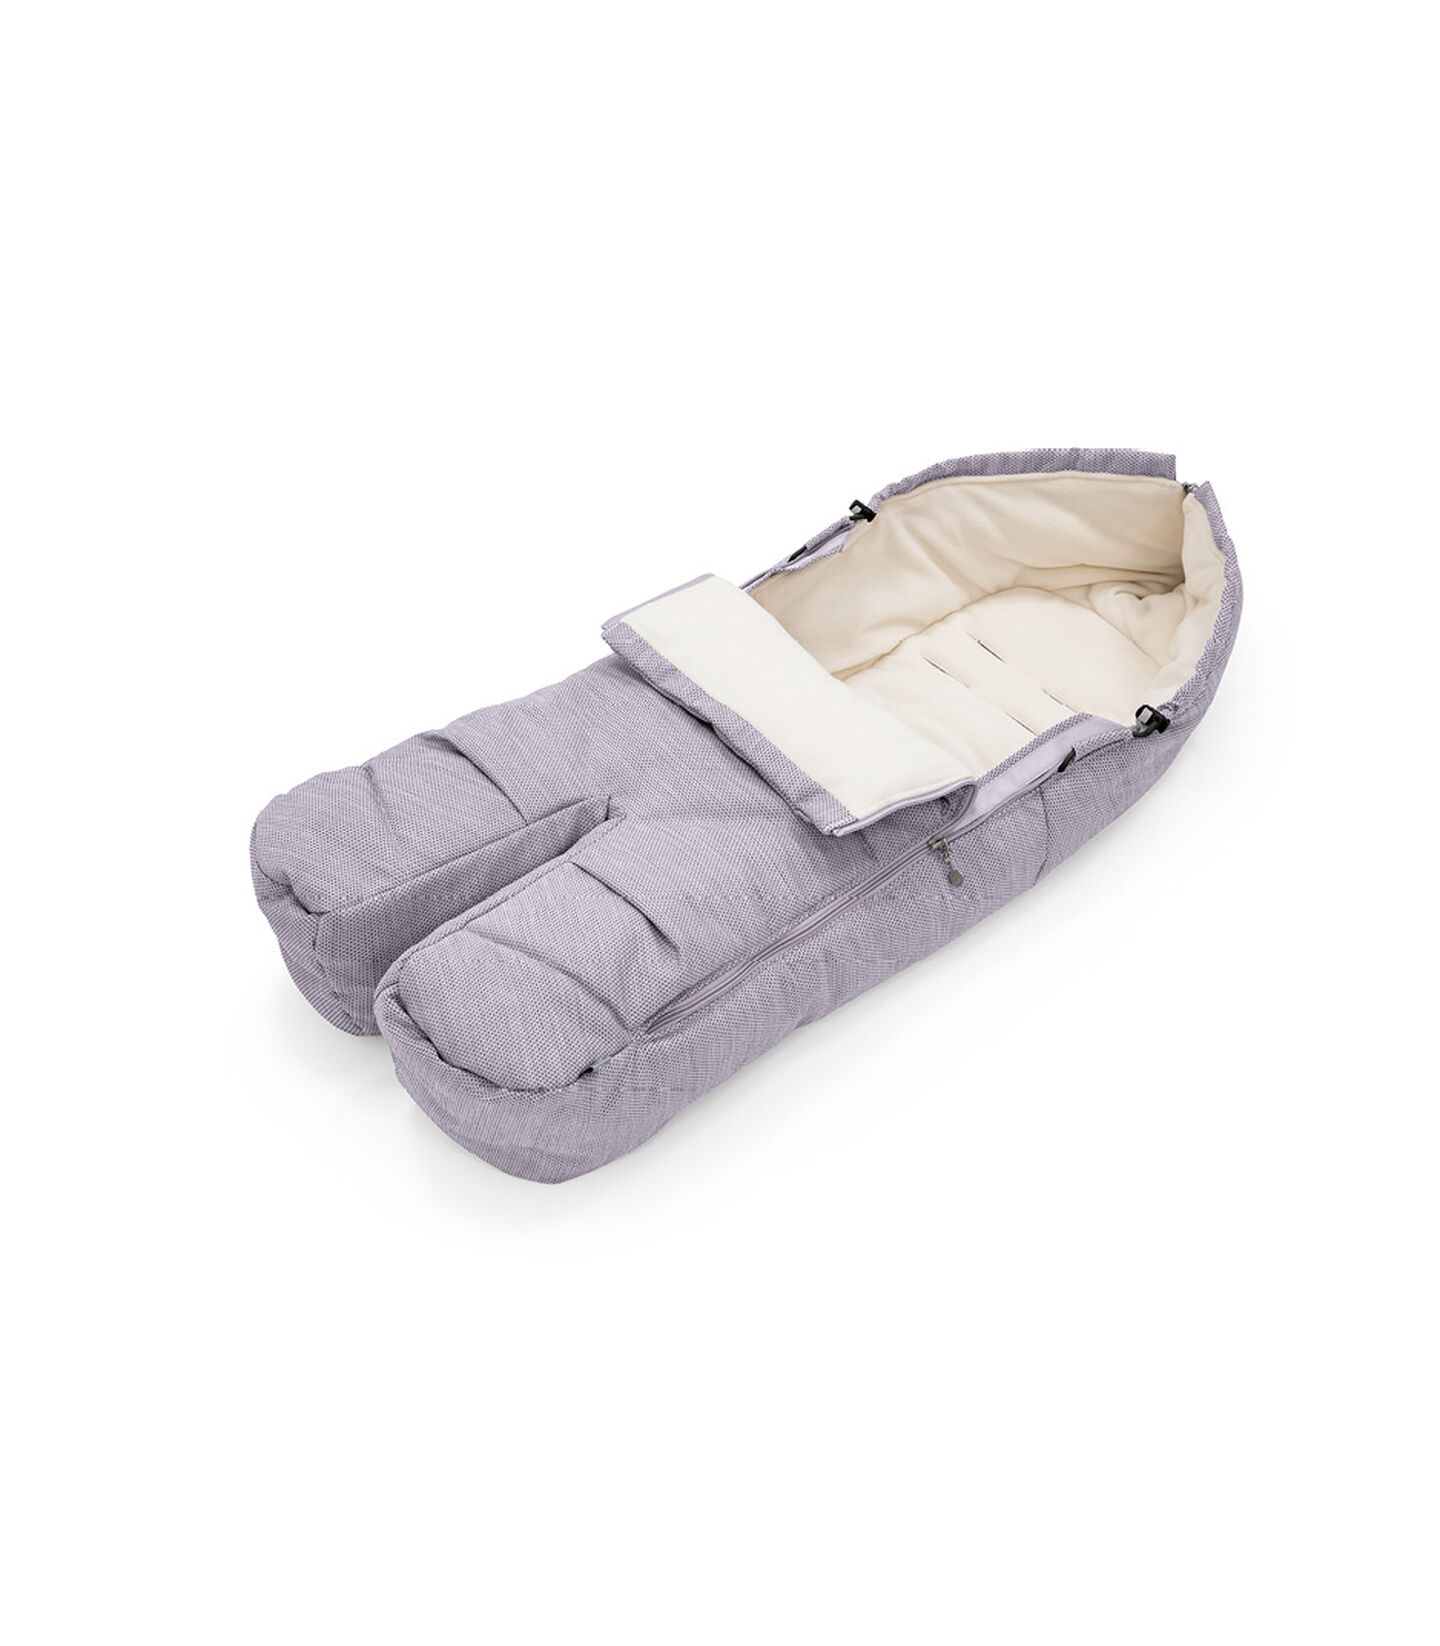 Stokke® Foot Muff Brushed Lilac, Brushed Lilac, mainview view 1